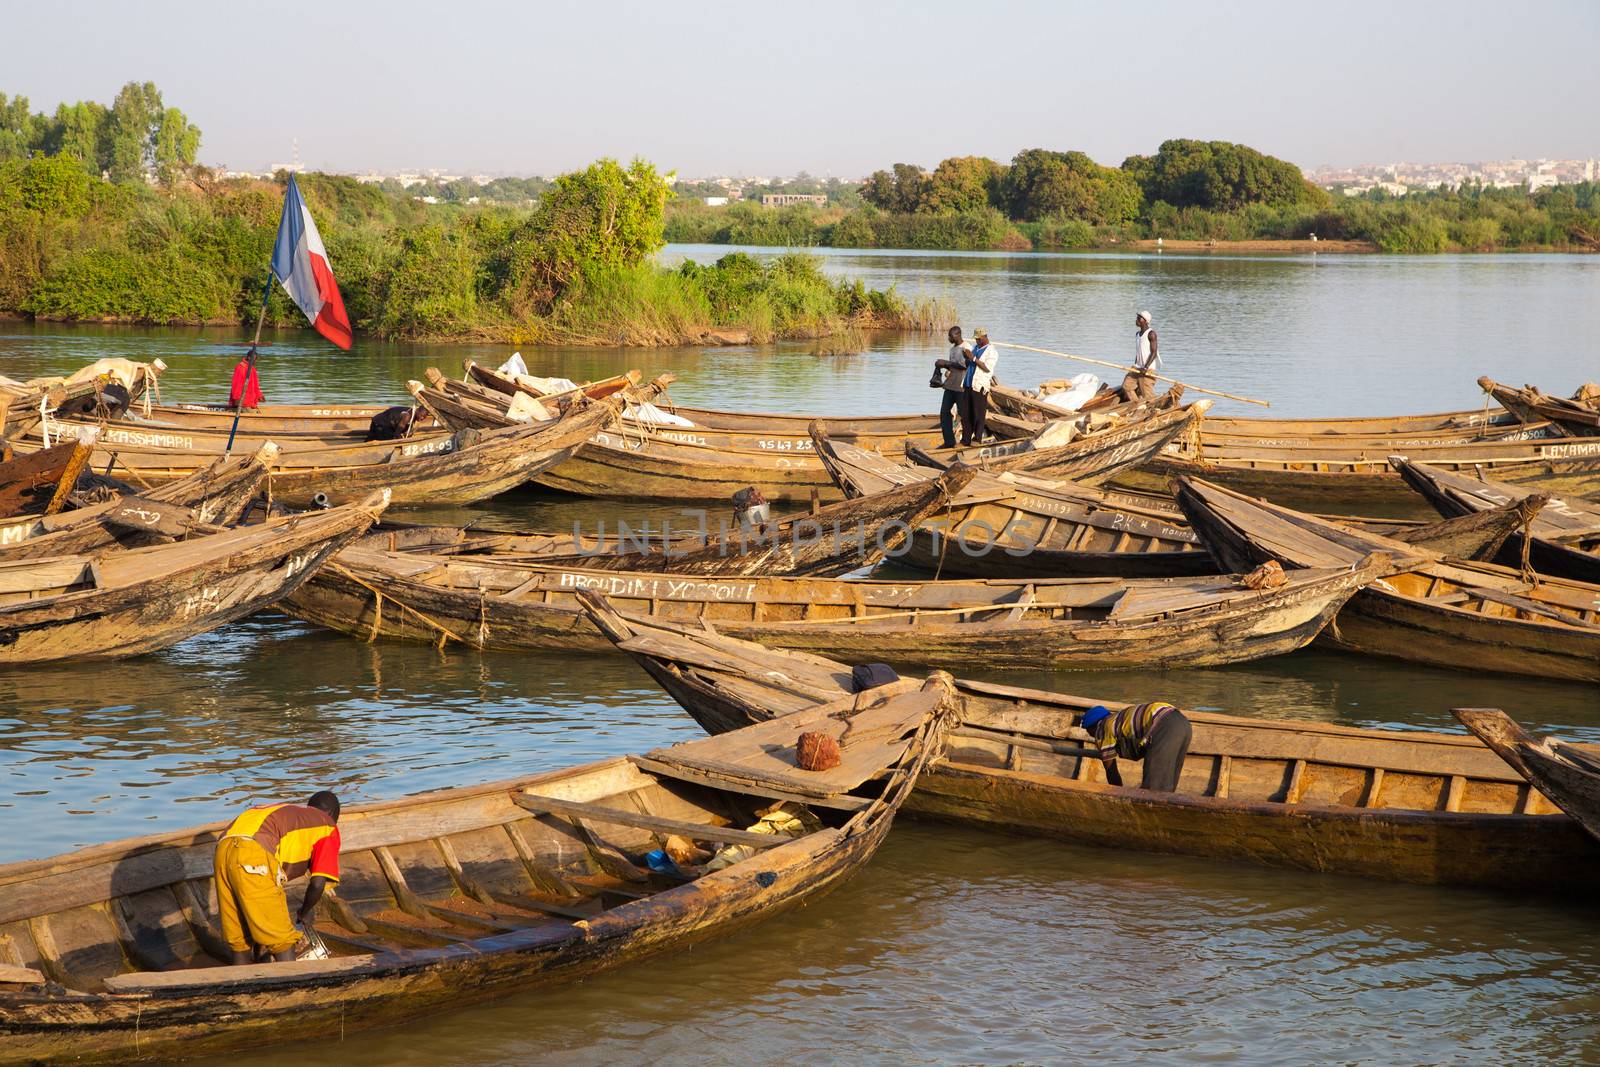 fisher men working in their boat on the Niger River  by watchtheworld